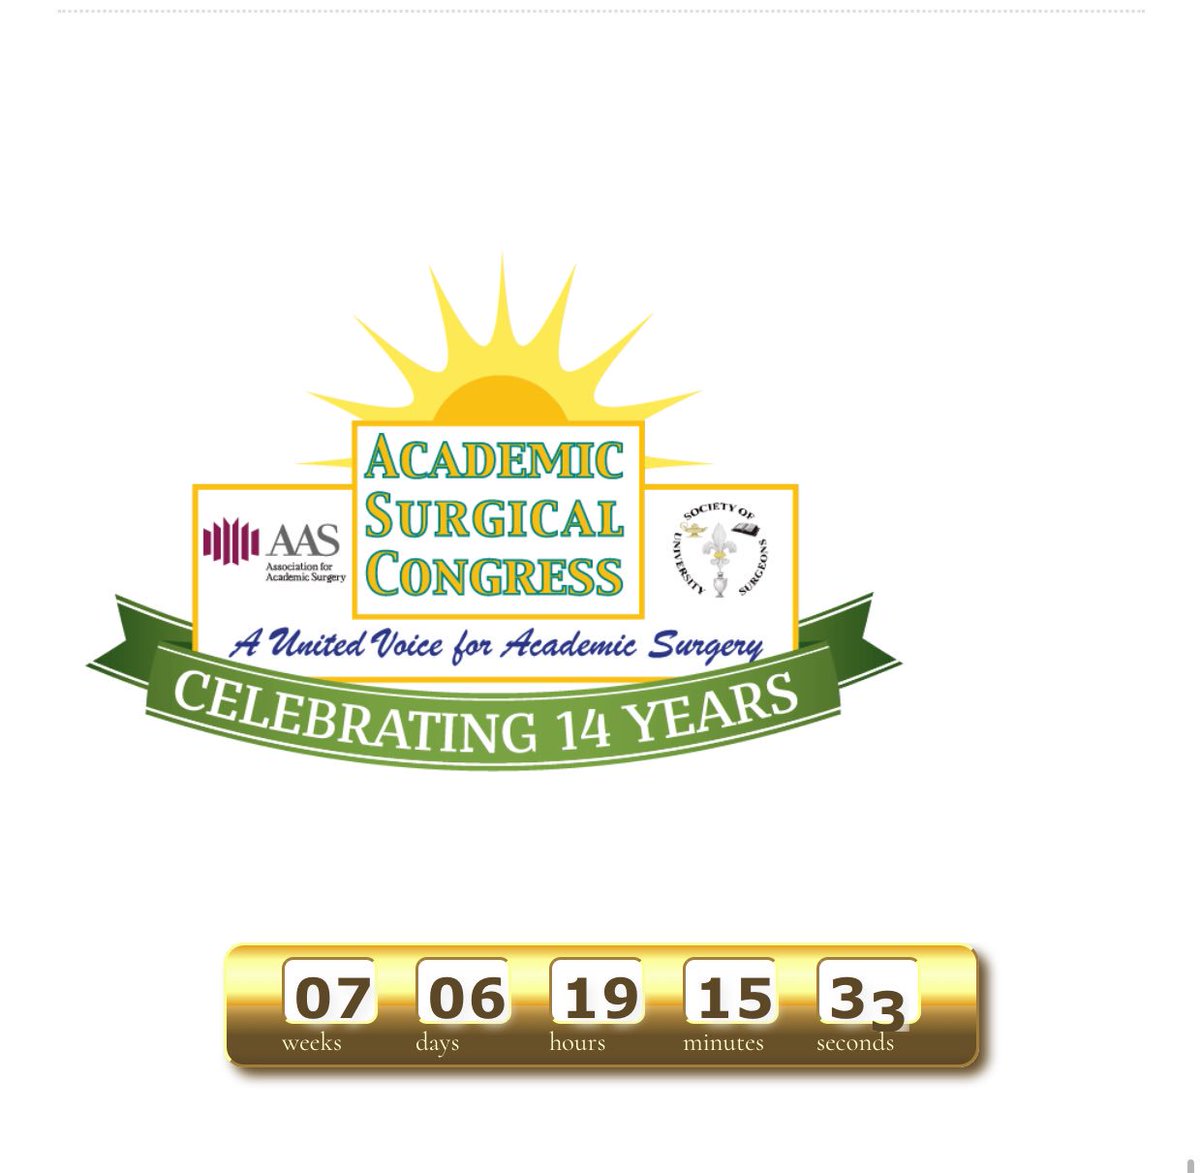 #ASC2019 already beating records! More than 1600 have registered early for the conference at @HiltonHouston on Feb 4-6 2019 ! Super congrats @dreskim @JaymeLocke @AcademicSurgery @UnivSurg Program Chairs & all the participants who make this the bestest academic surgery meeting !